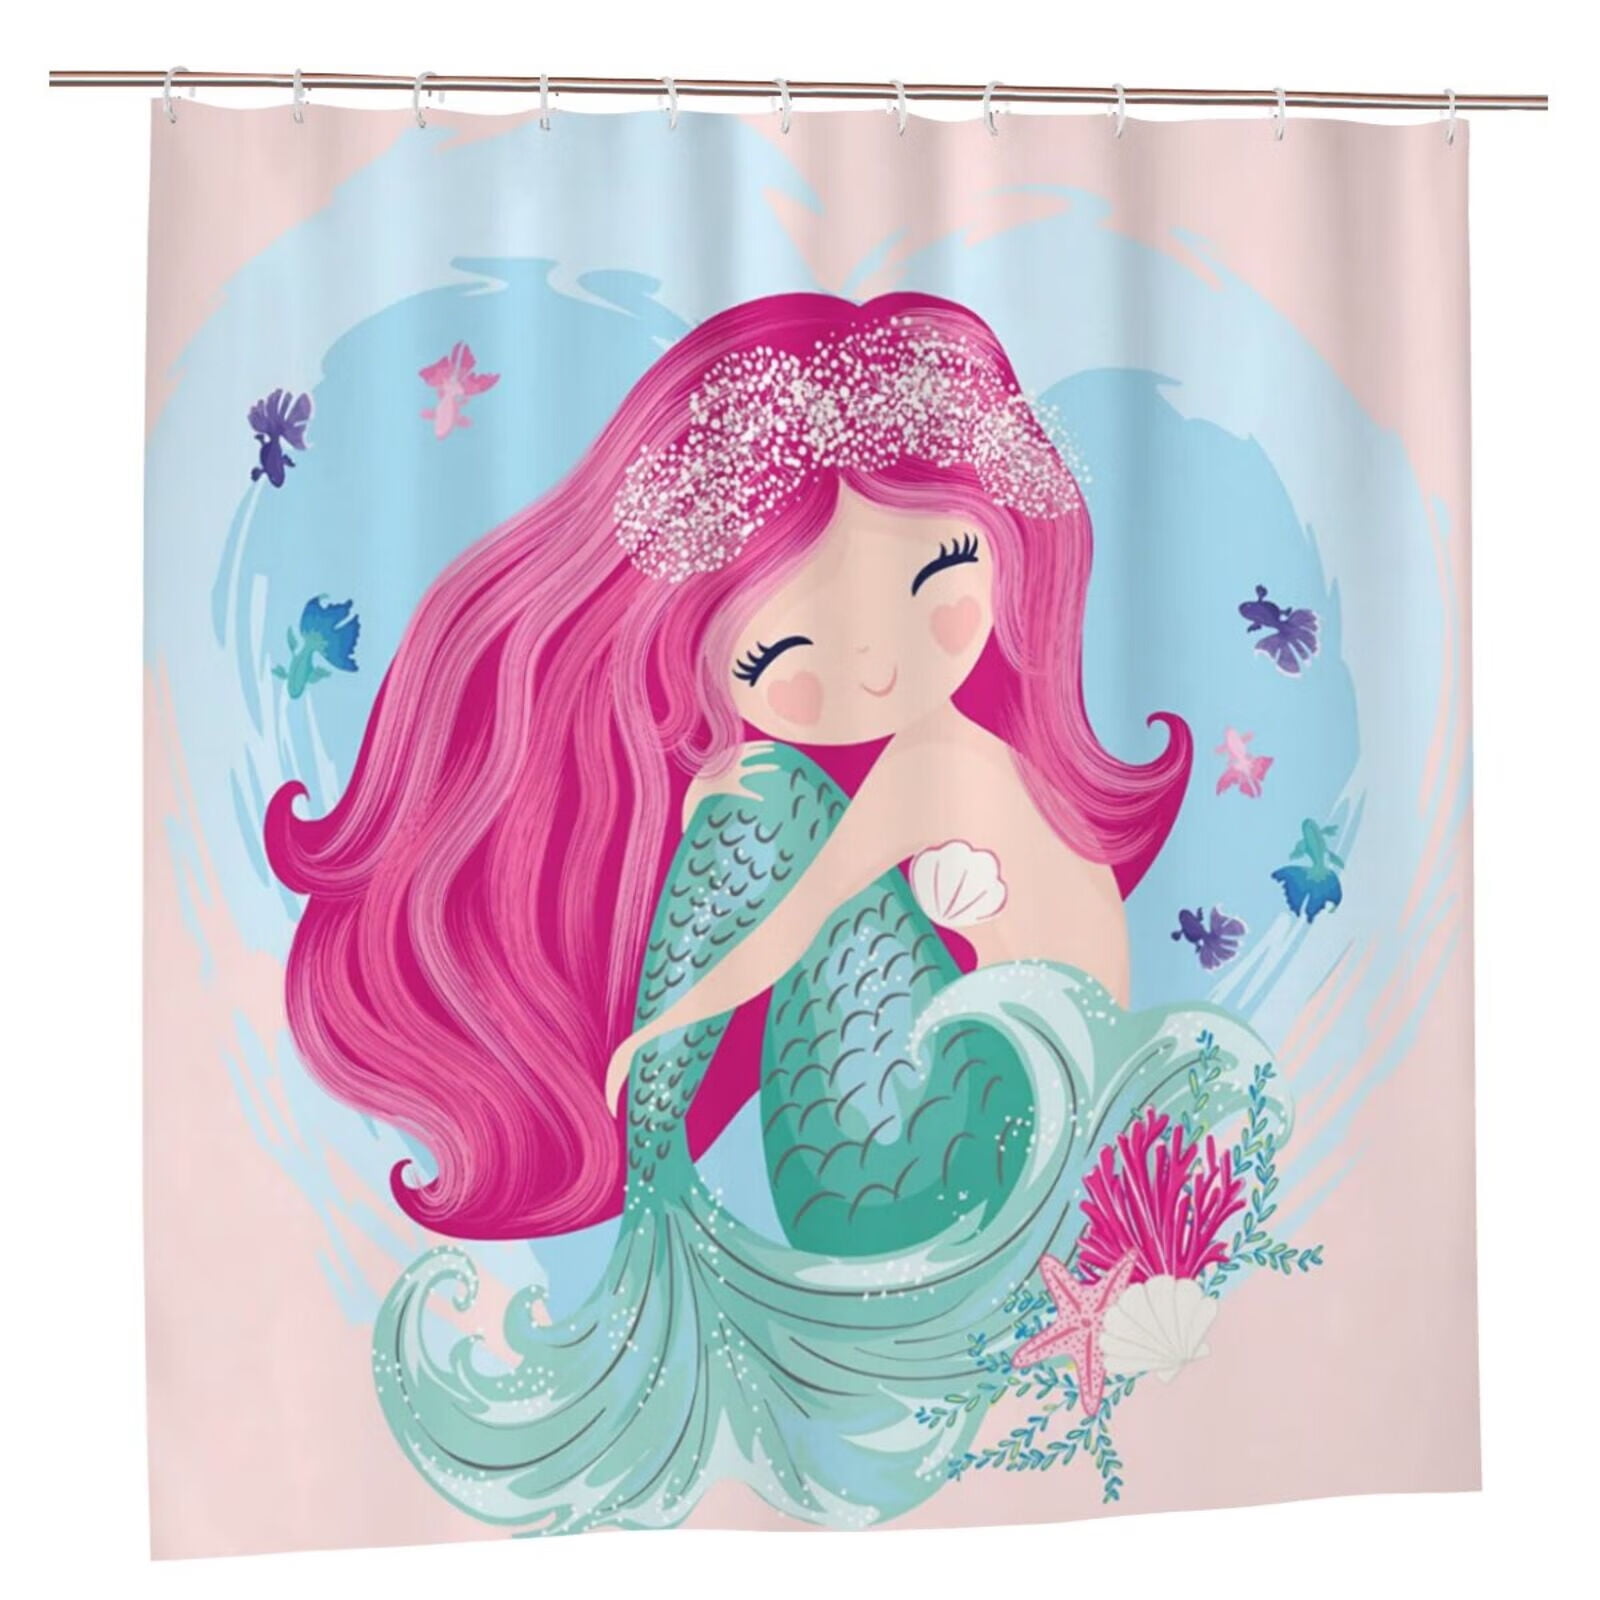 JOOCAR Mermaid Tail Fish Scale Shower Curtain for Bathroom Decor 72Wx72H  Inch Colorful Ocean Theme Kids Girls Home Accessories 